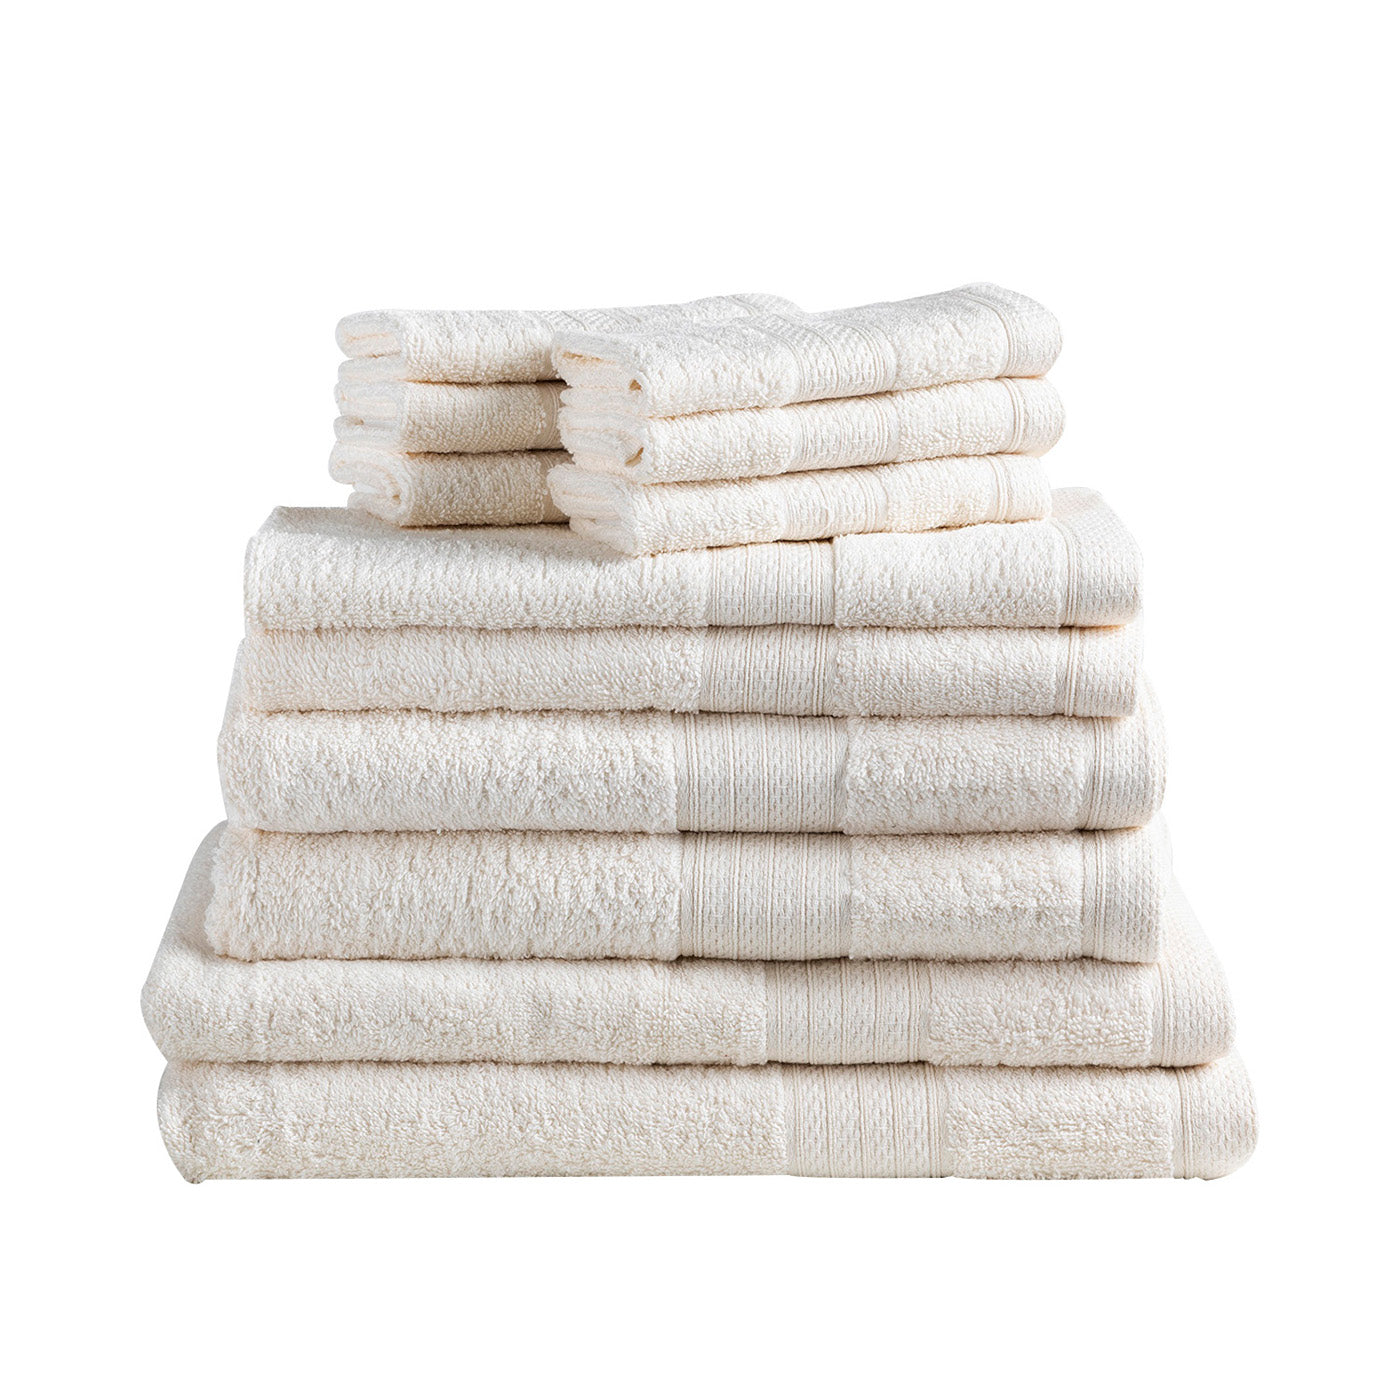 hotels - What is the use of all these towels? - Travel Stack Exchange